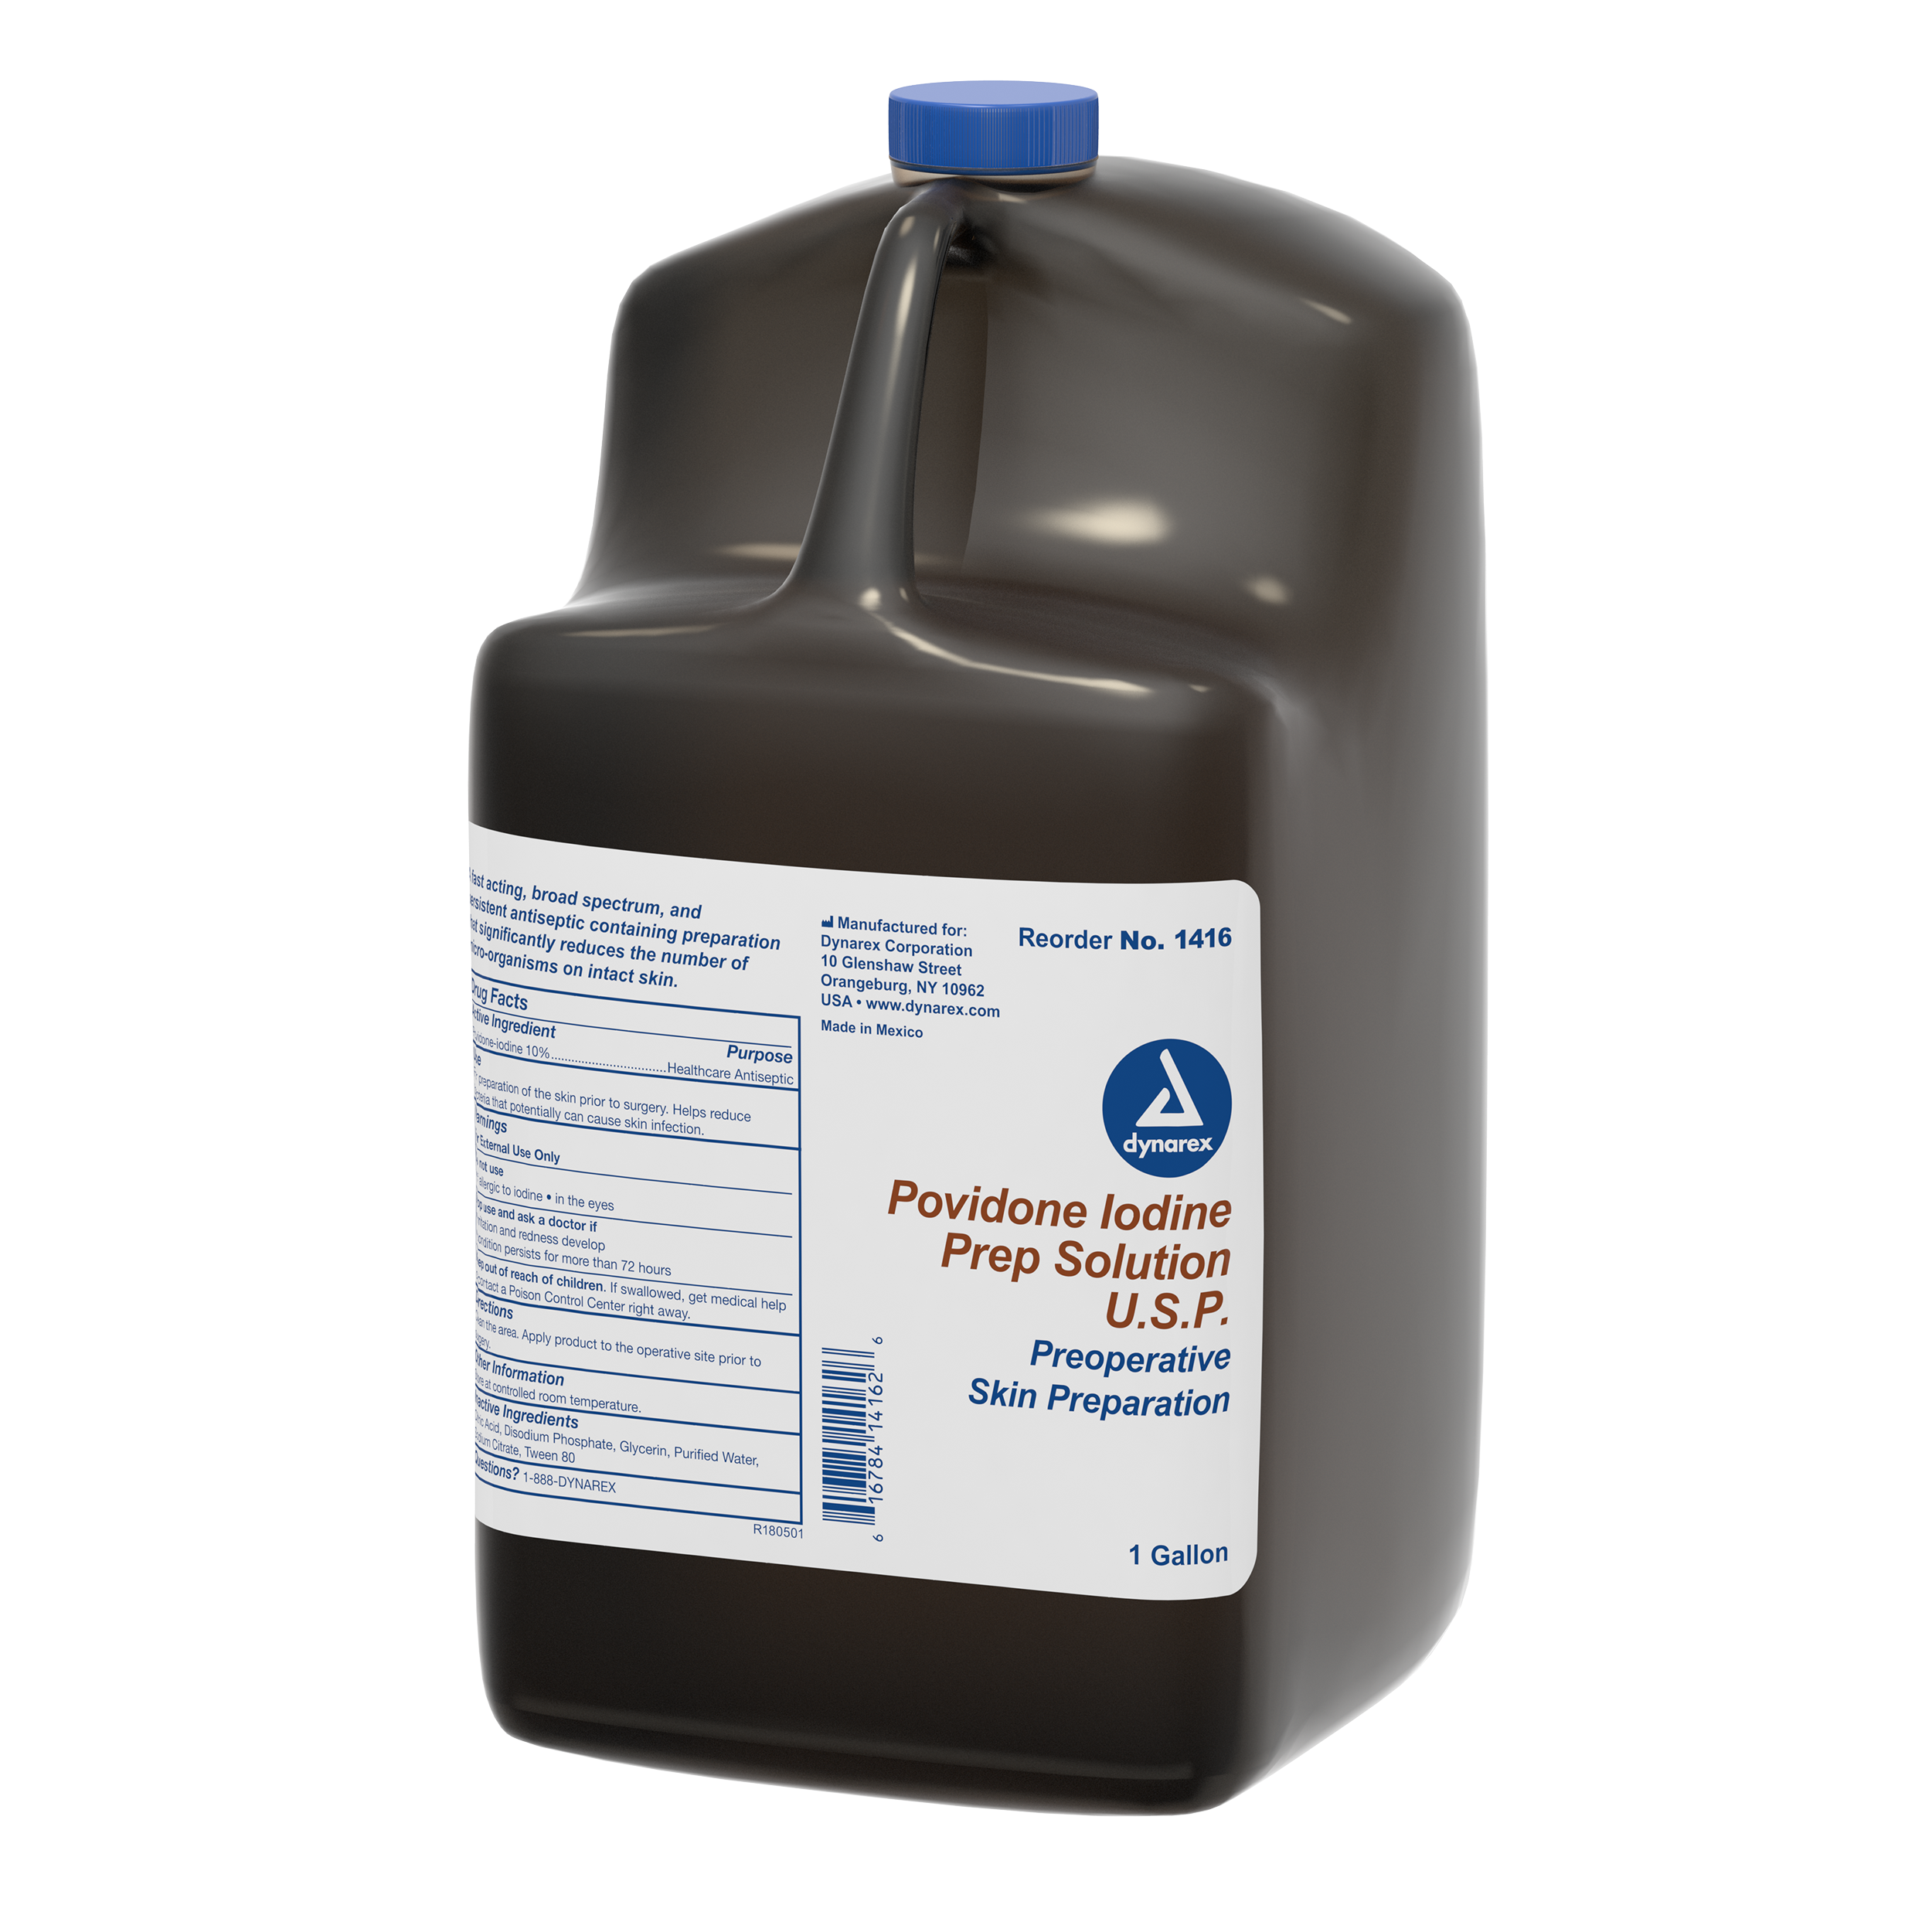 Povidone Iodine Prep Solutions Products, Supplies and Equipment